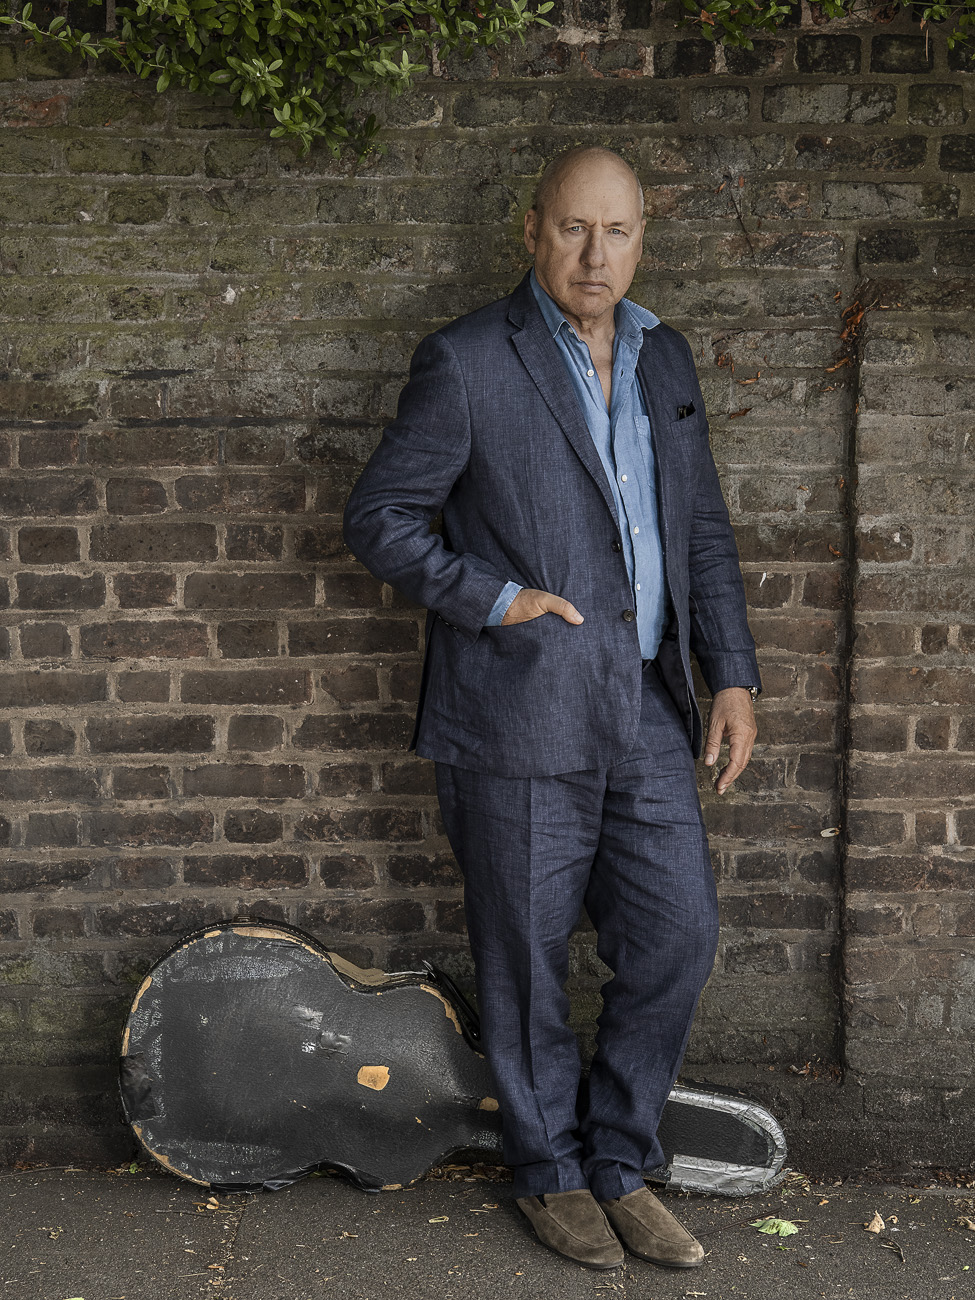 Portraits of British songwriter and guitarist Mark Knopfler for the release of his album 'Down The Road Whatever'.